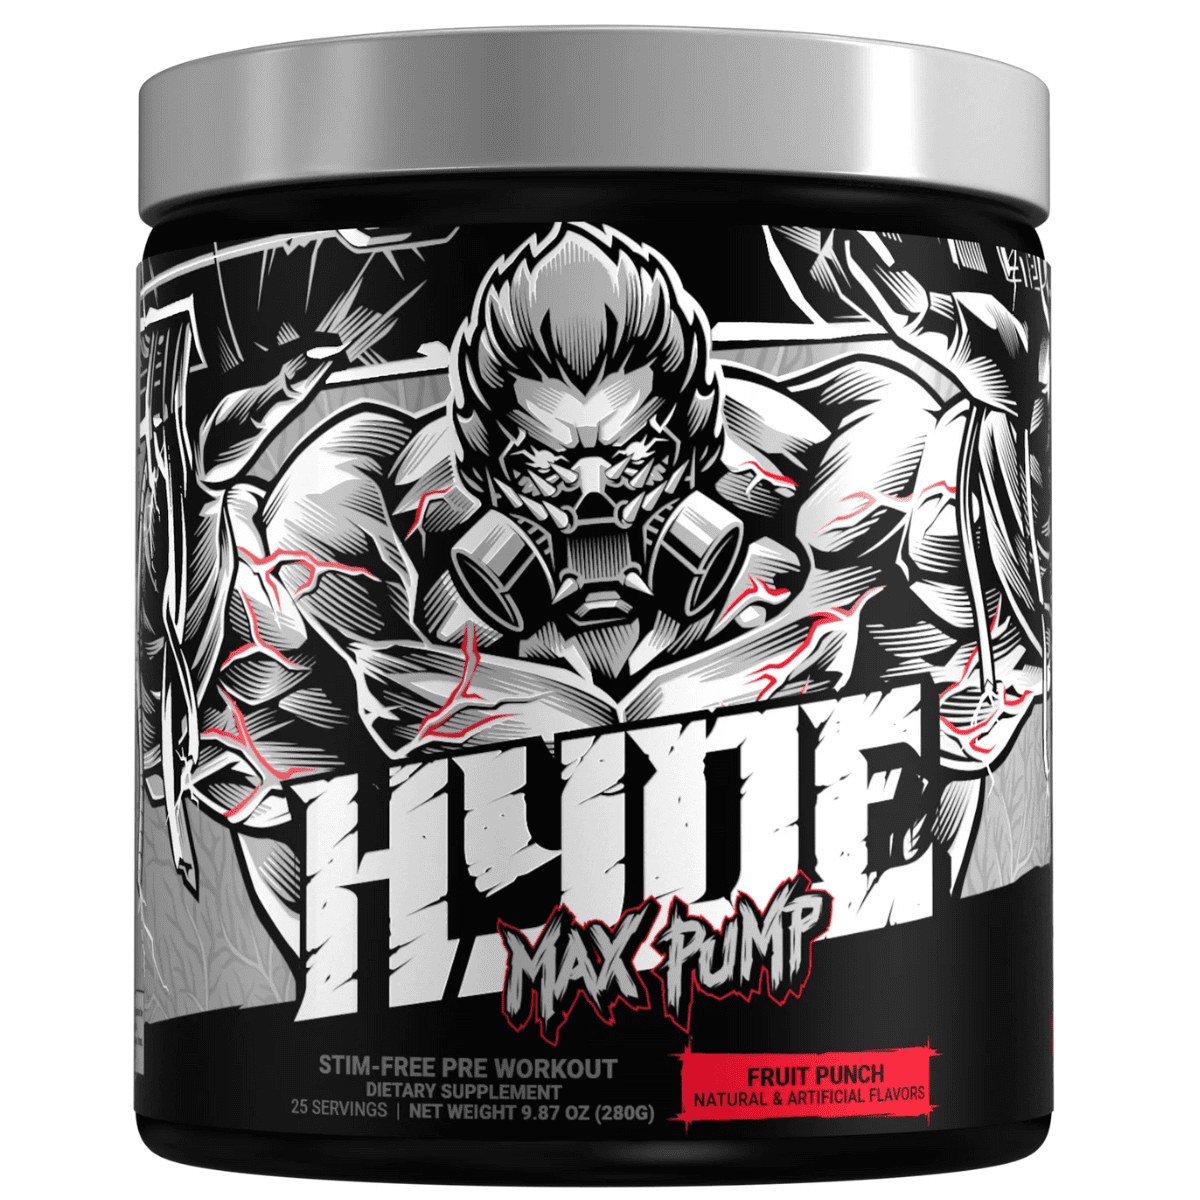 ProSupps HYDE Max Pump - 4